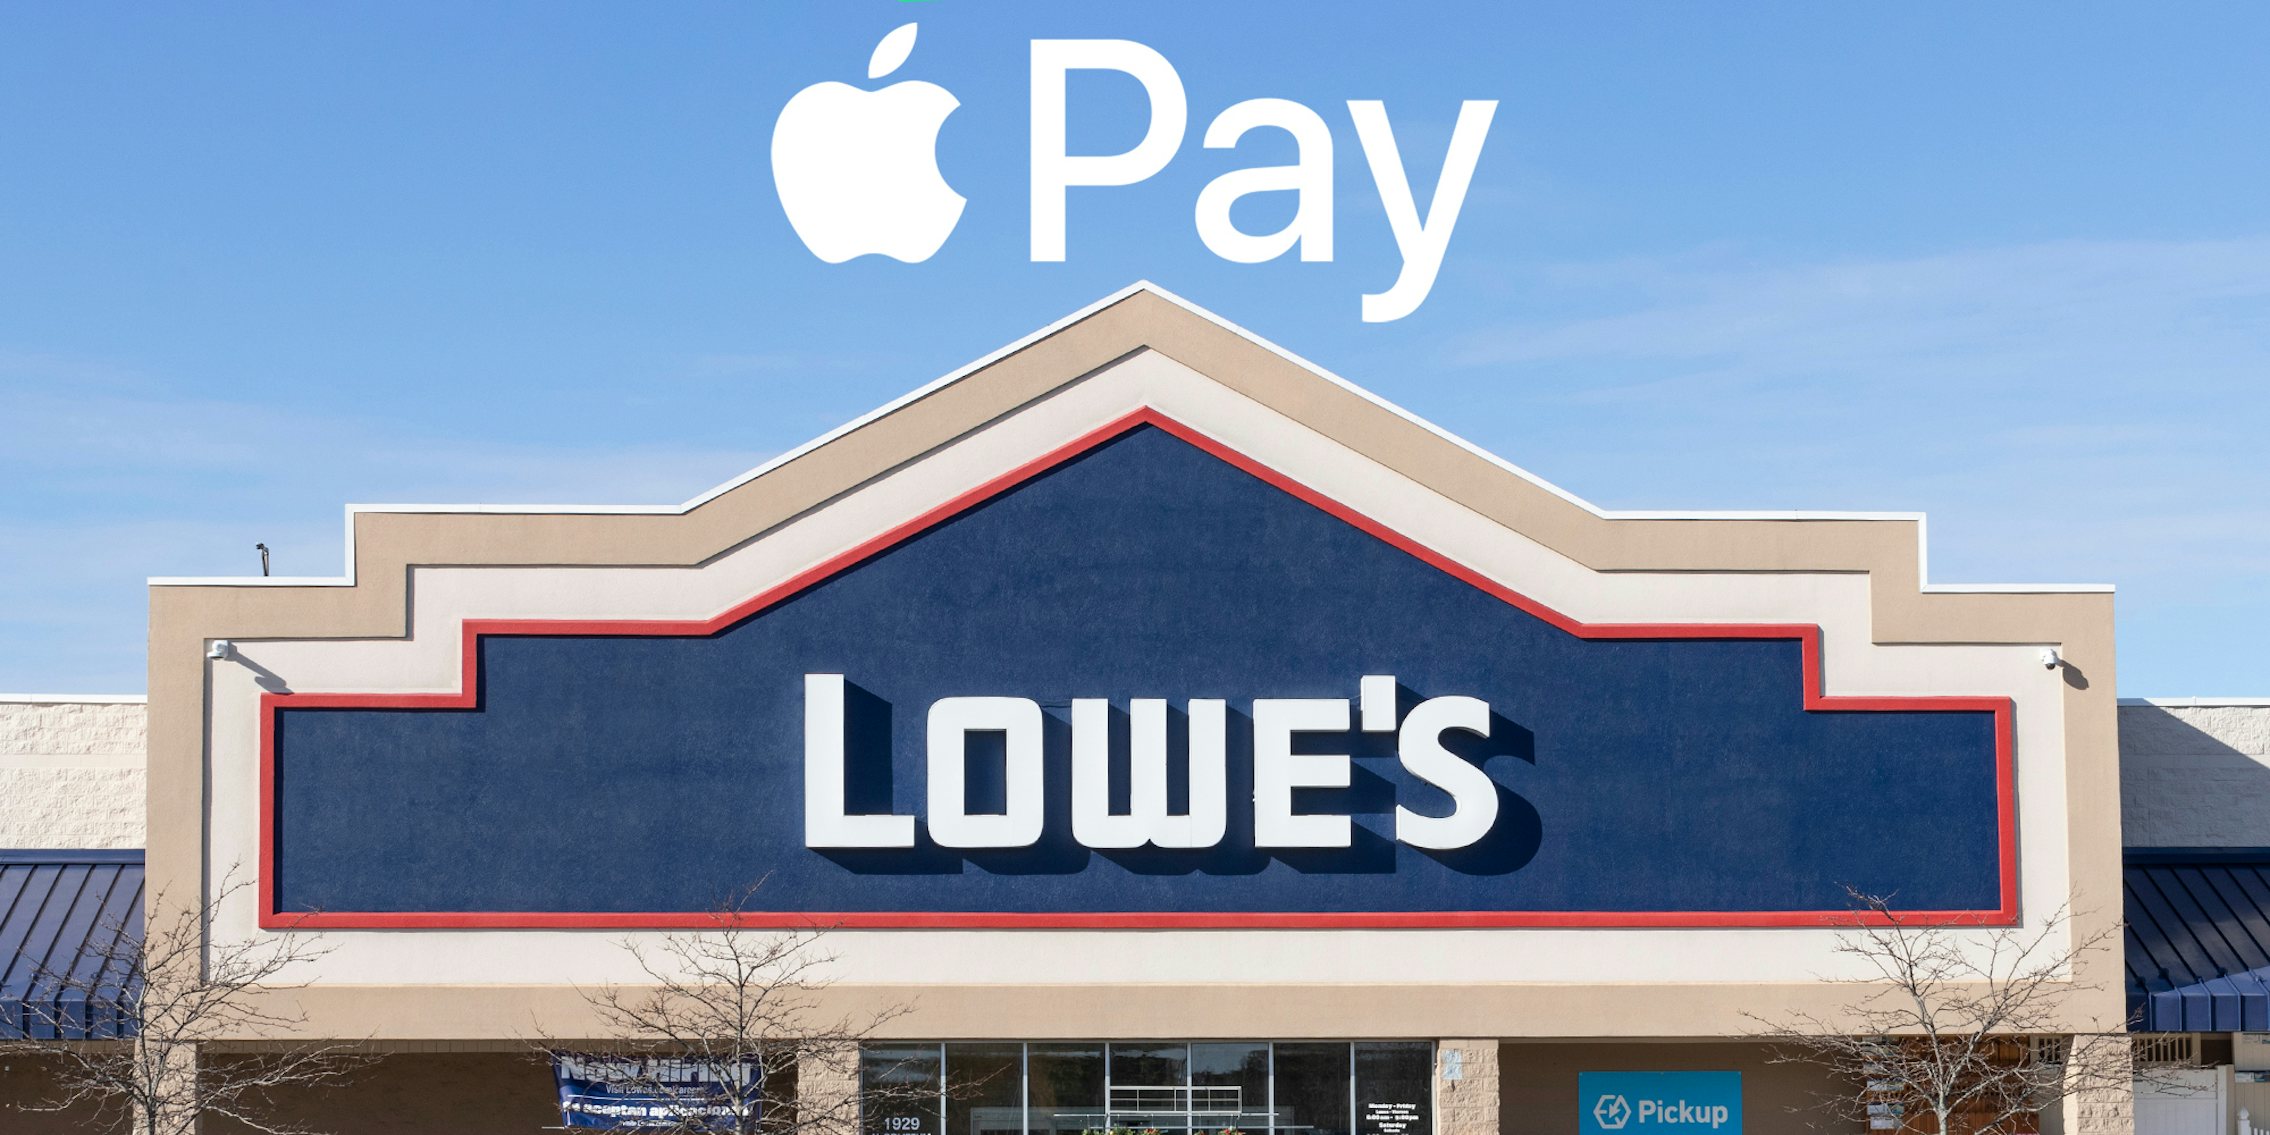 Does Lowe's Take Apple Pay?